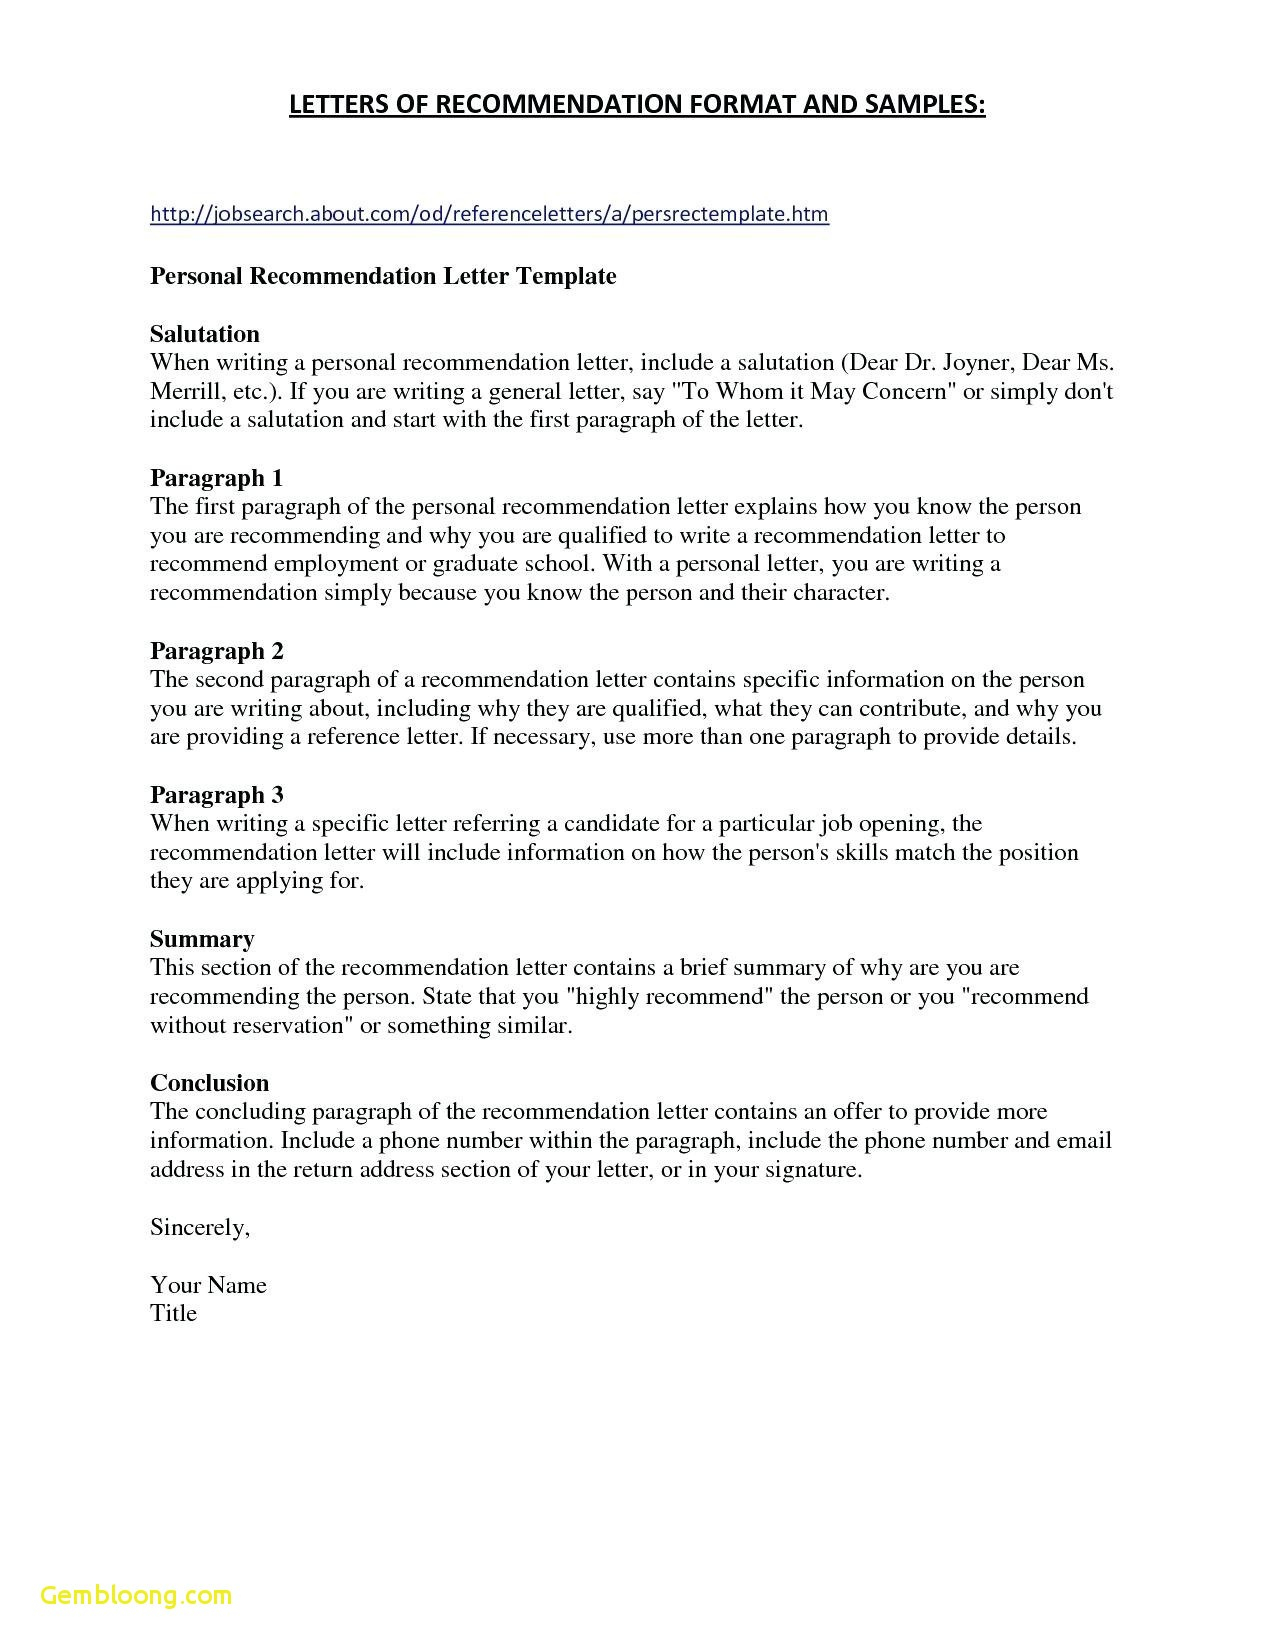 Reference Letter format Template - Reference Page Template for Resume Best References for Resume